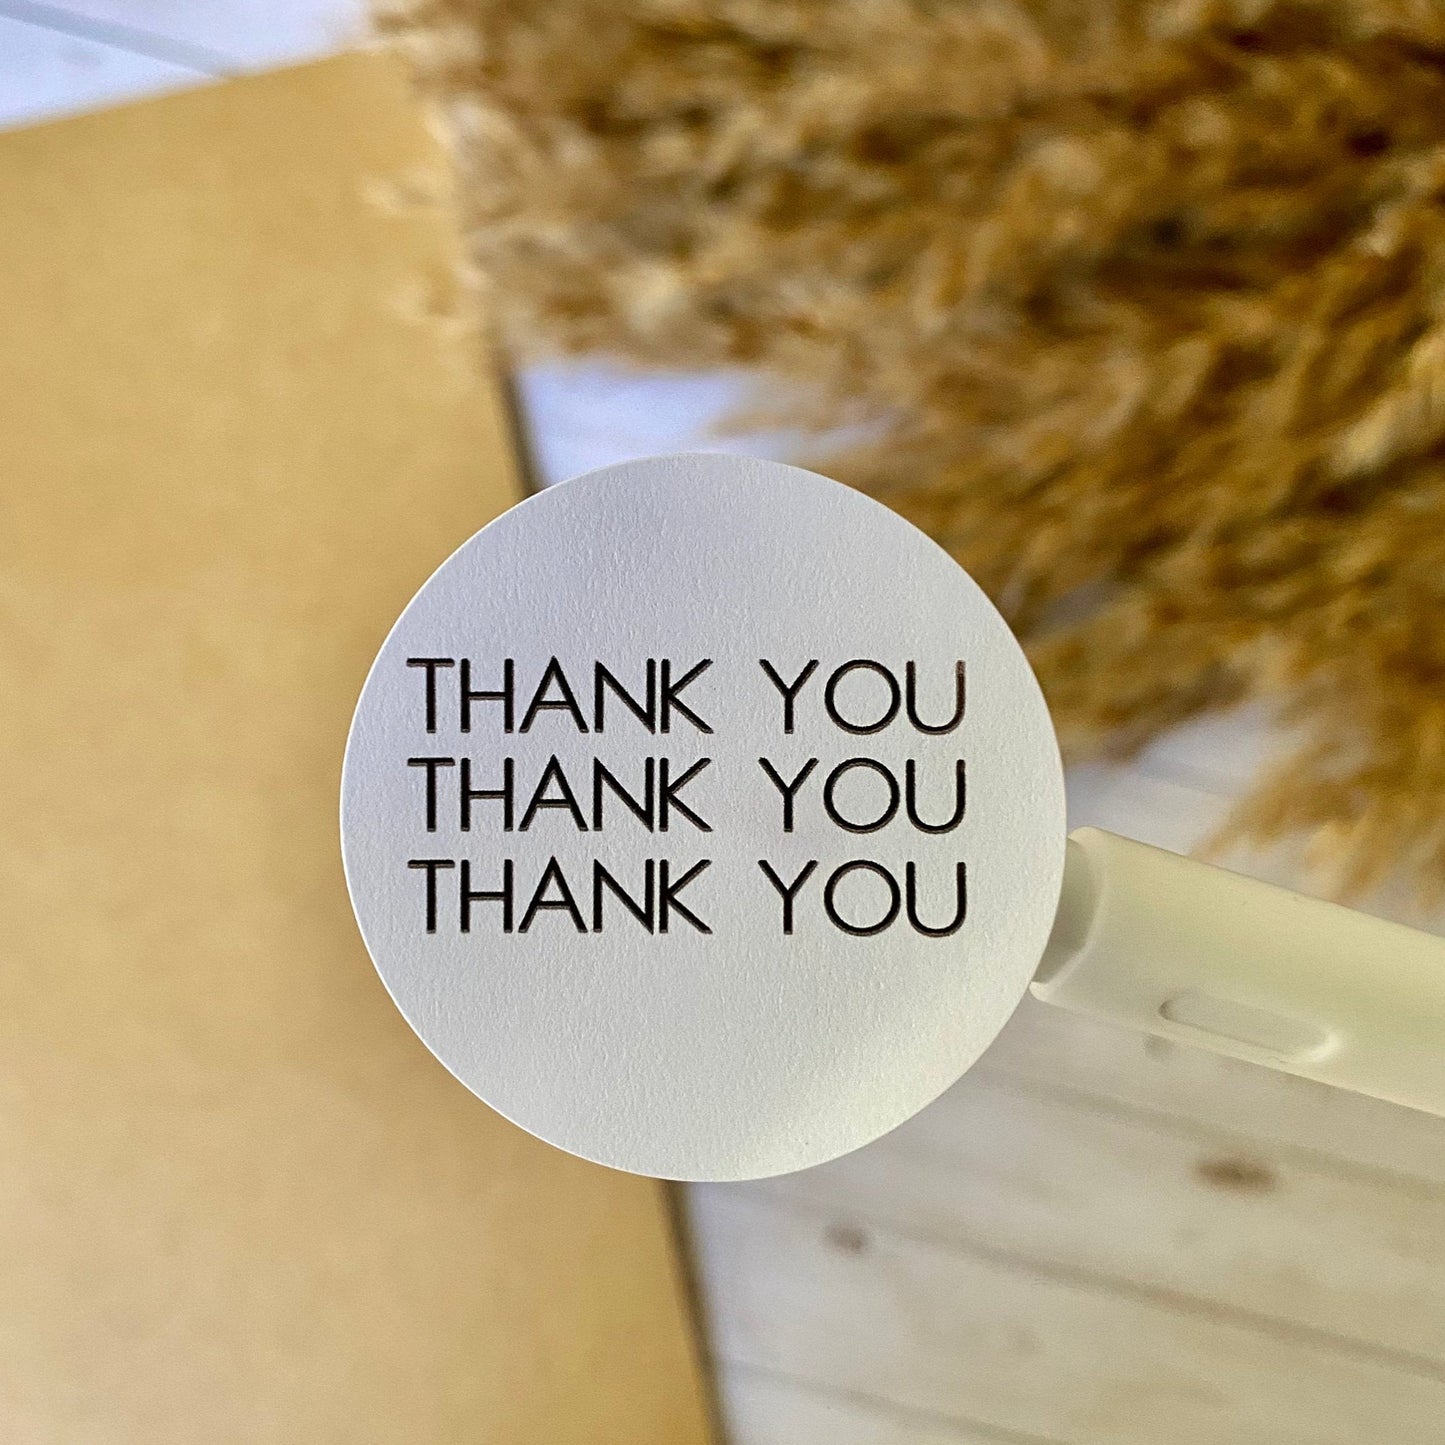 Thank You Packaging Stickers - 1.67" Thank You Stickers - Minimalistic Thank You Sticker - Small Business Packaging Stickers